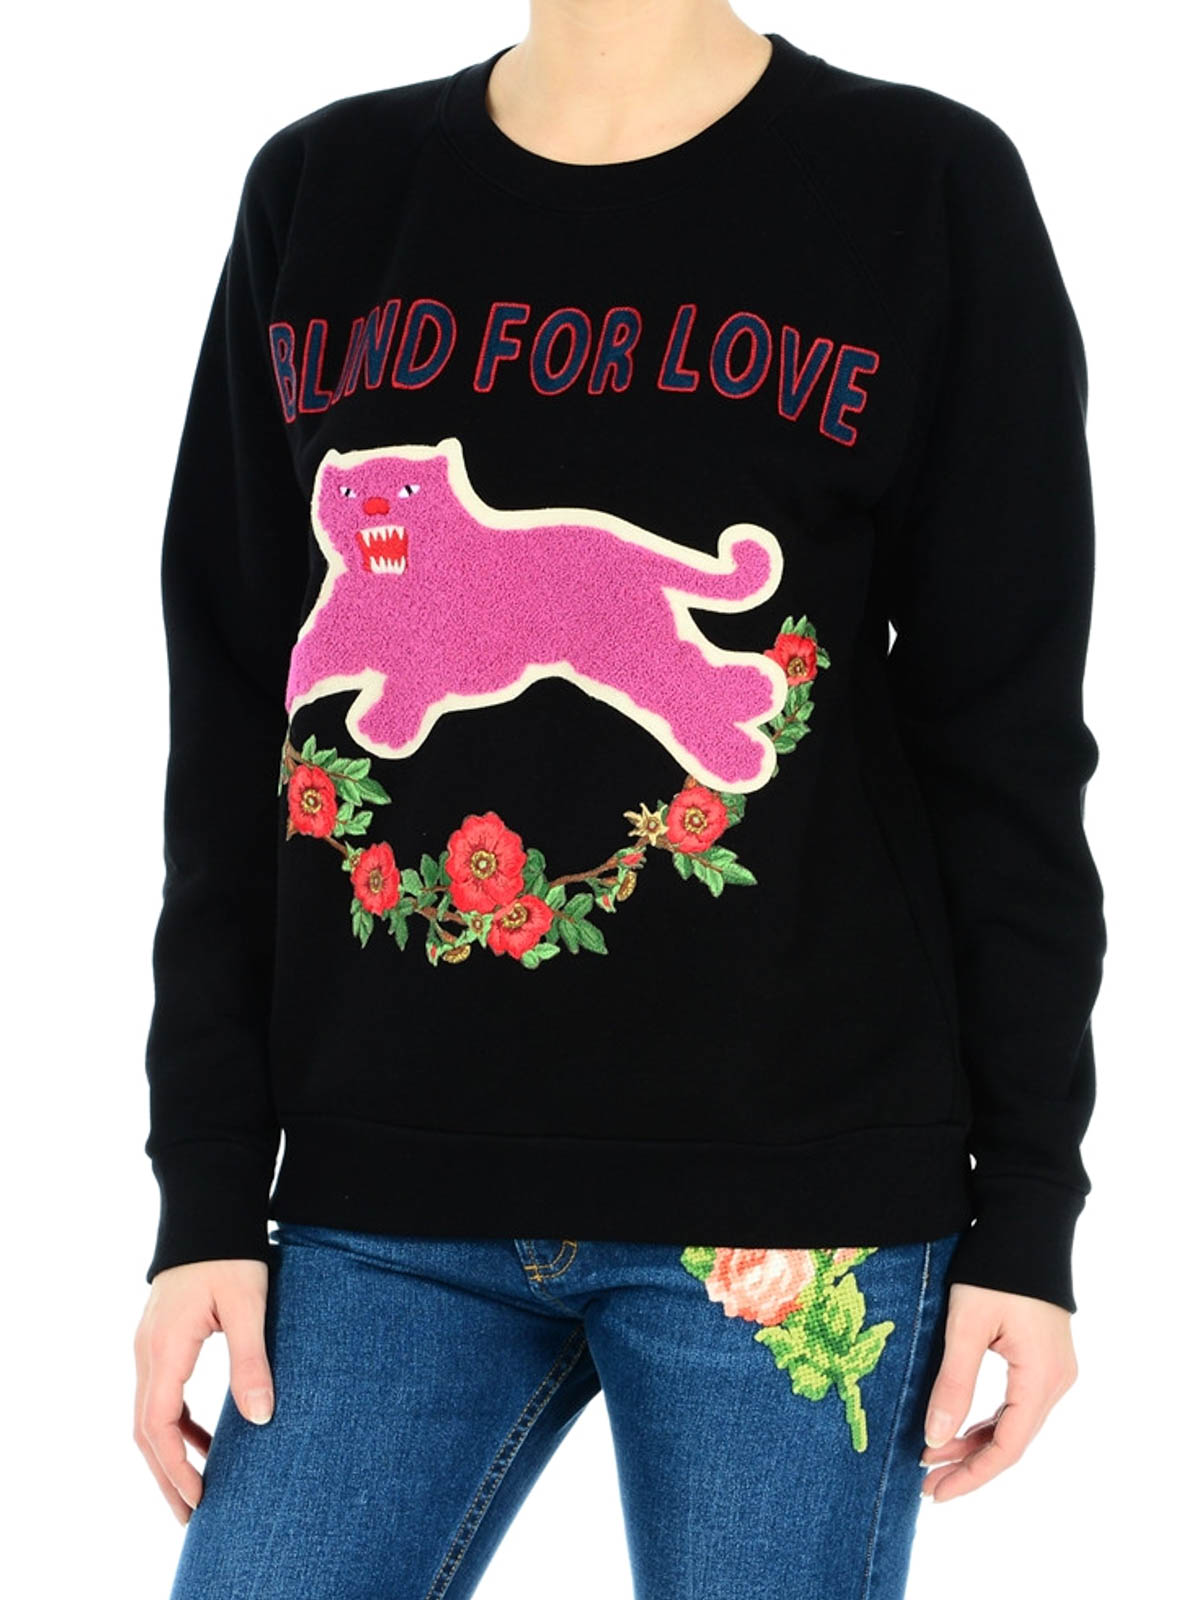 gucci blind for love hoodie